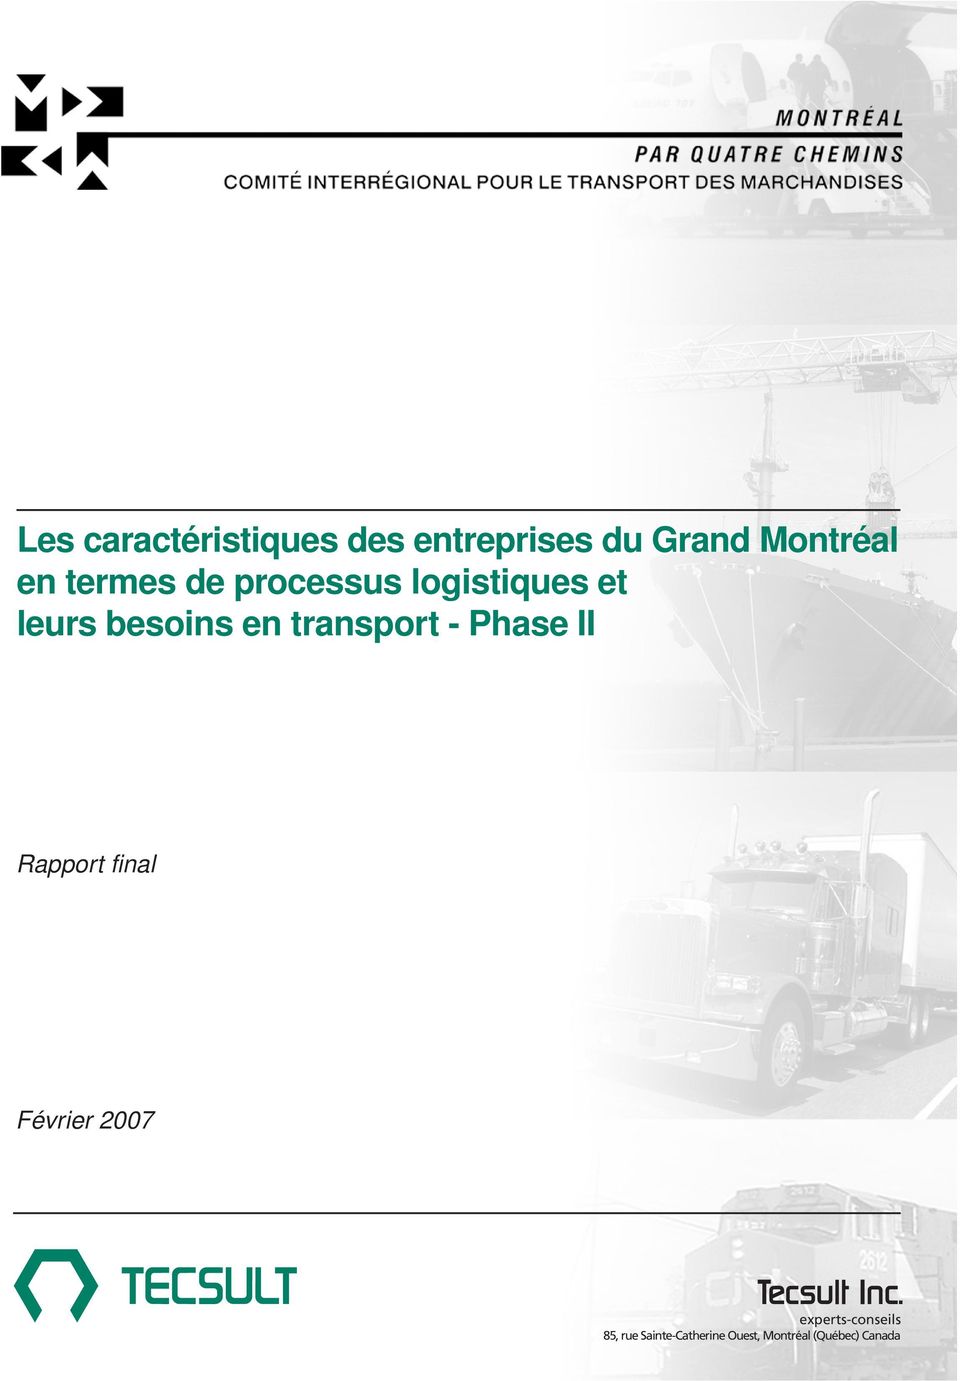 transport - Phase II Février 2007 experts-conseils 85,